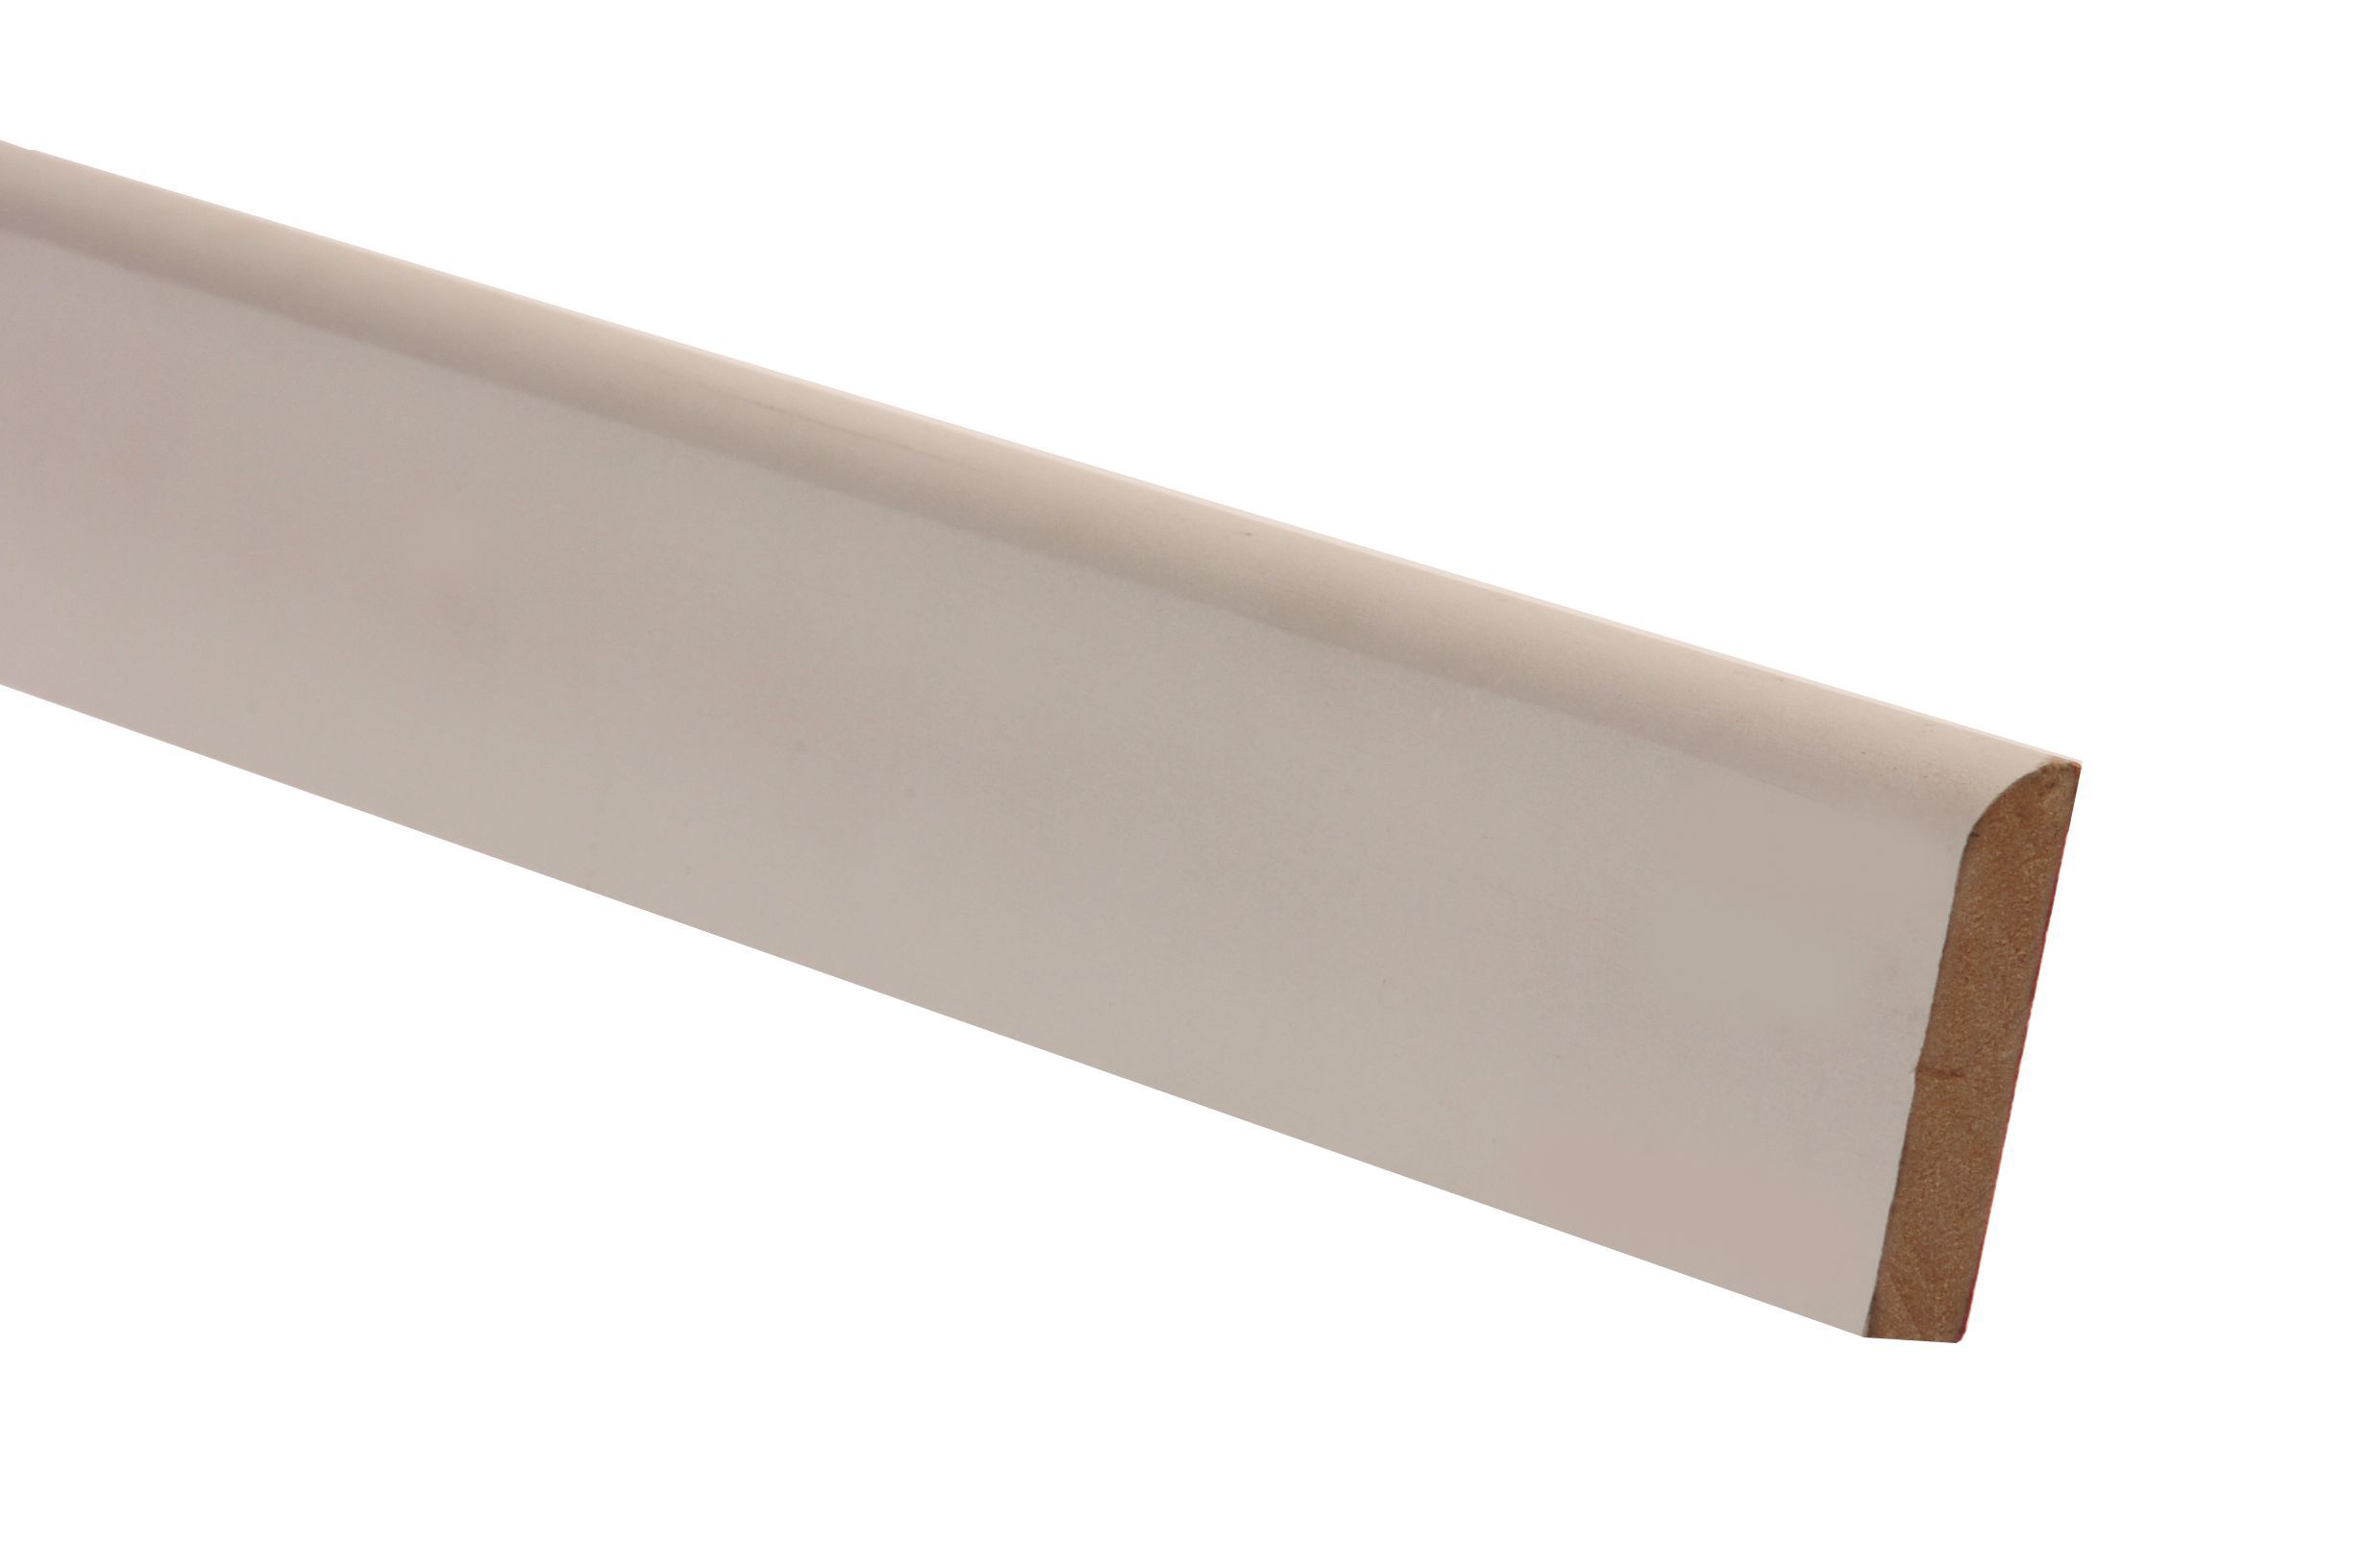 Primed White MDF Bullnose Architrave (L)2.1m (W)44mm (T)14.5mm, Pack of 5